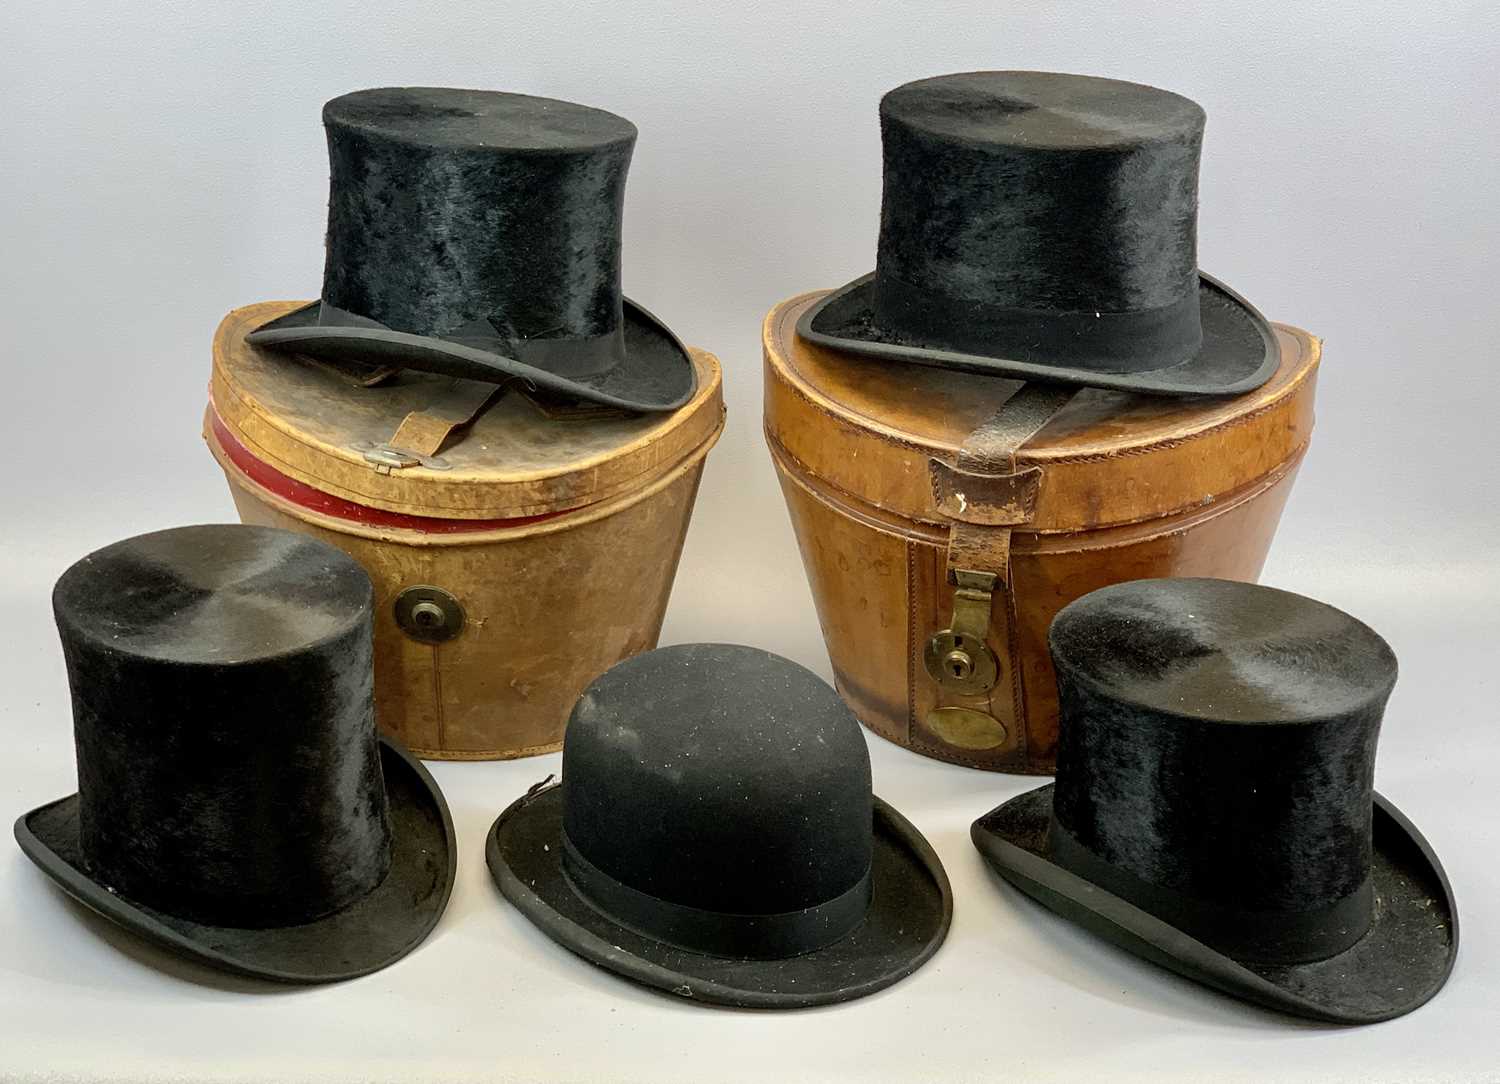 VINTAGE GENTS HATS: DUNN & CO. TOP HAT, in leather case, The W Make top hat...